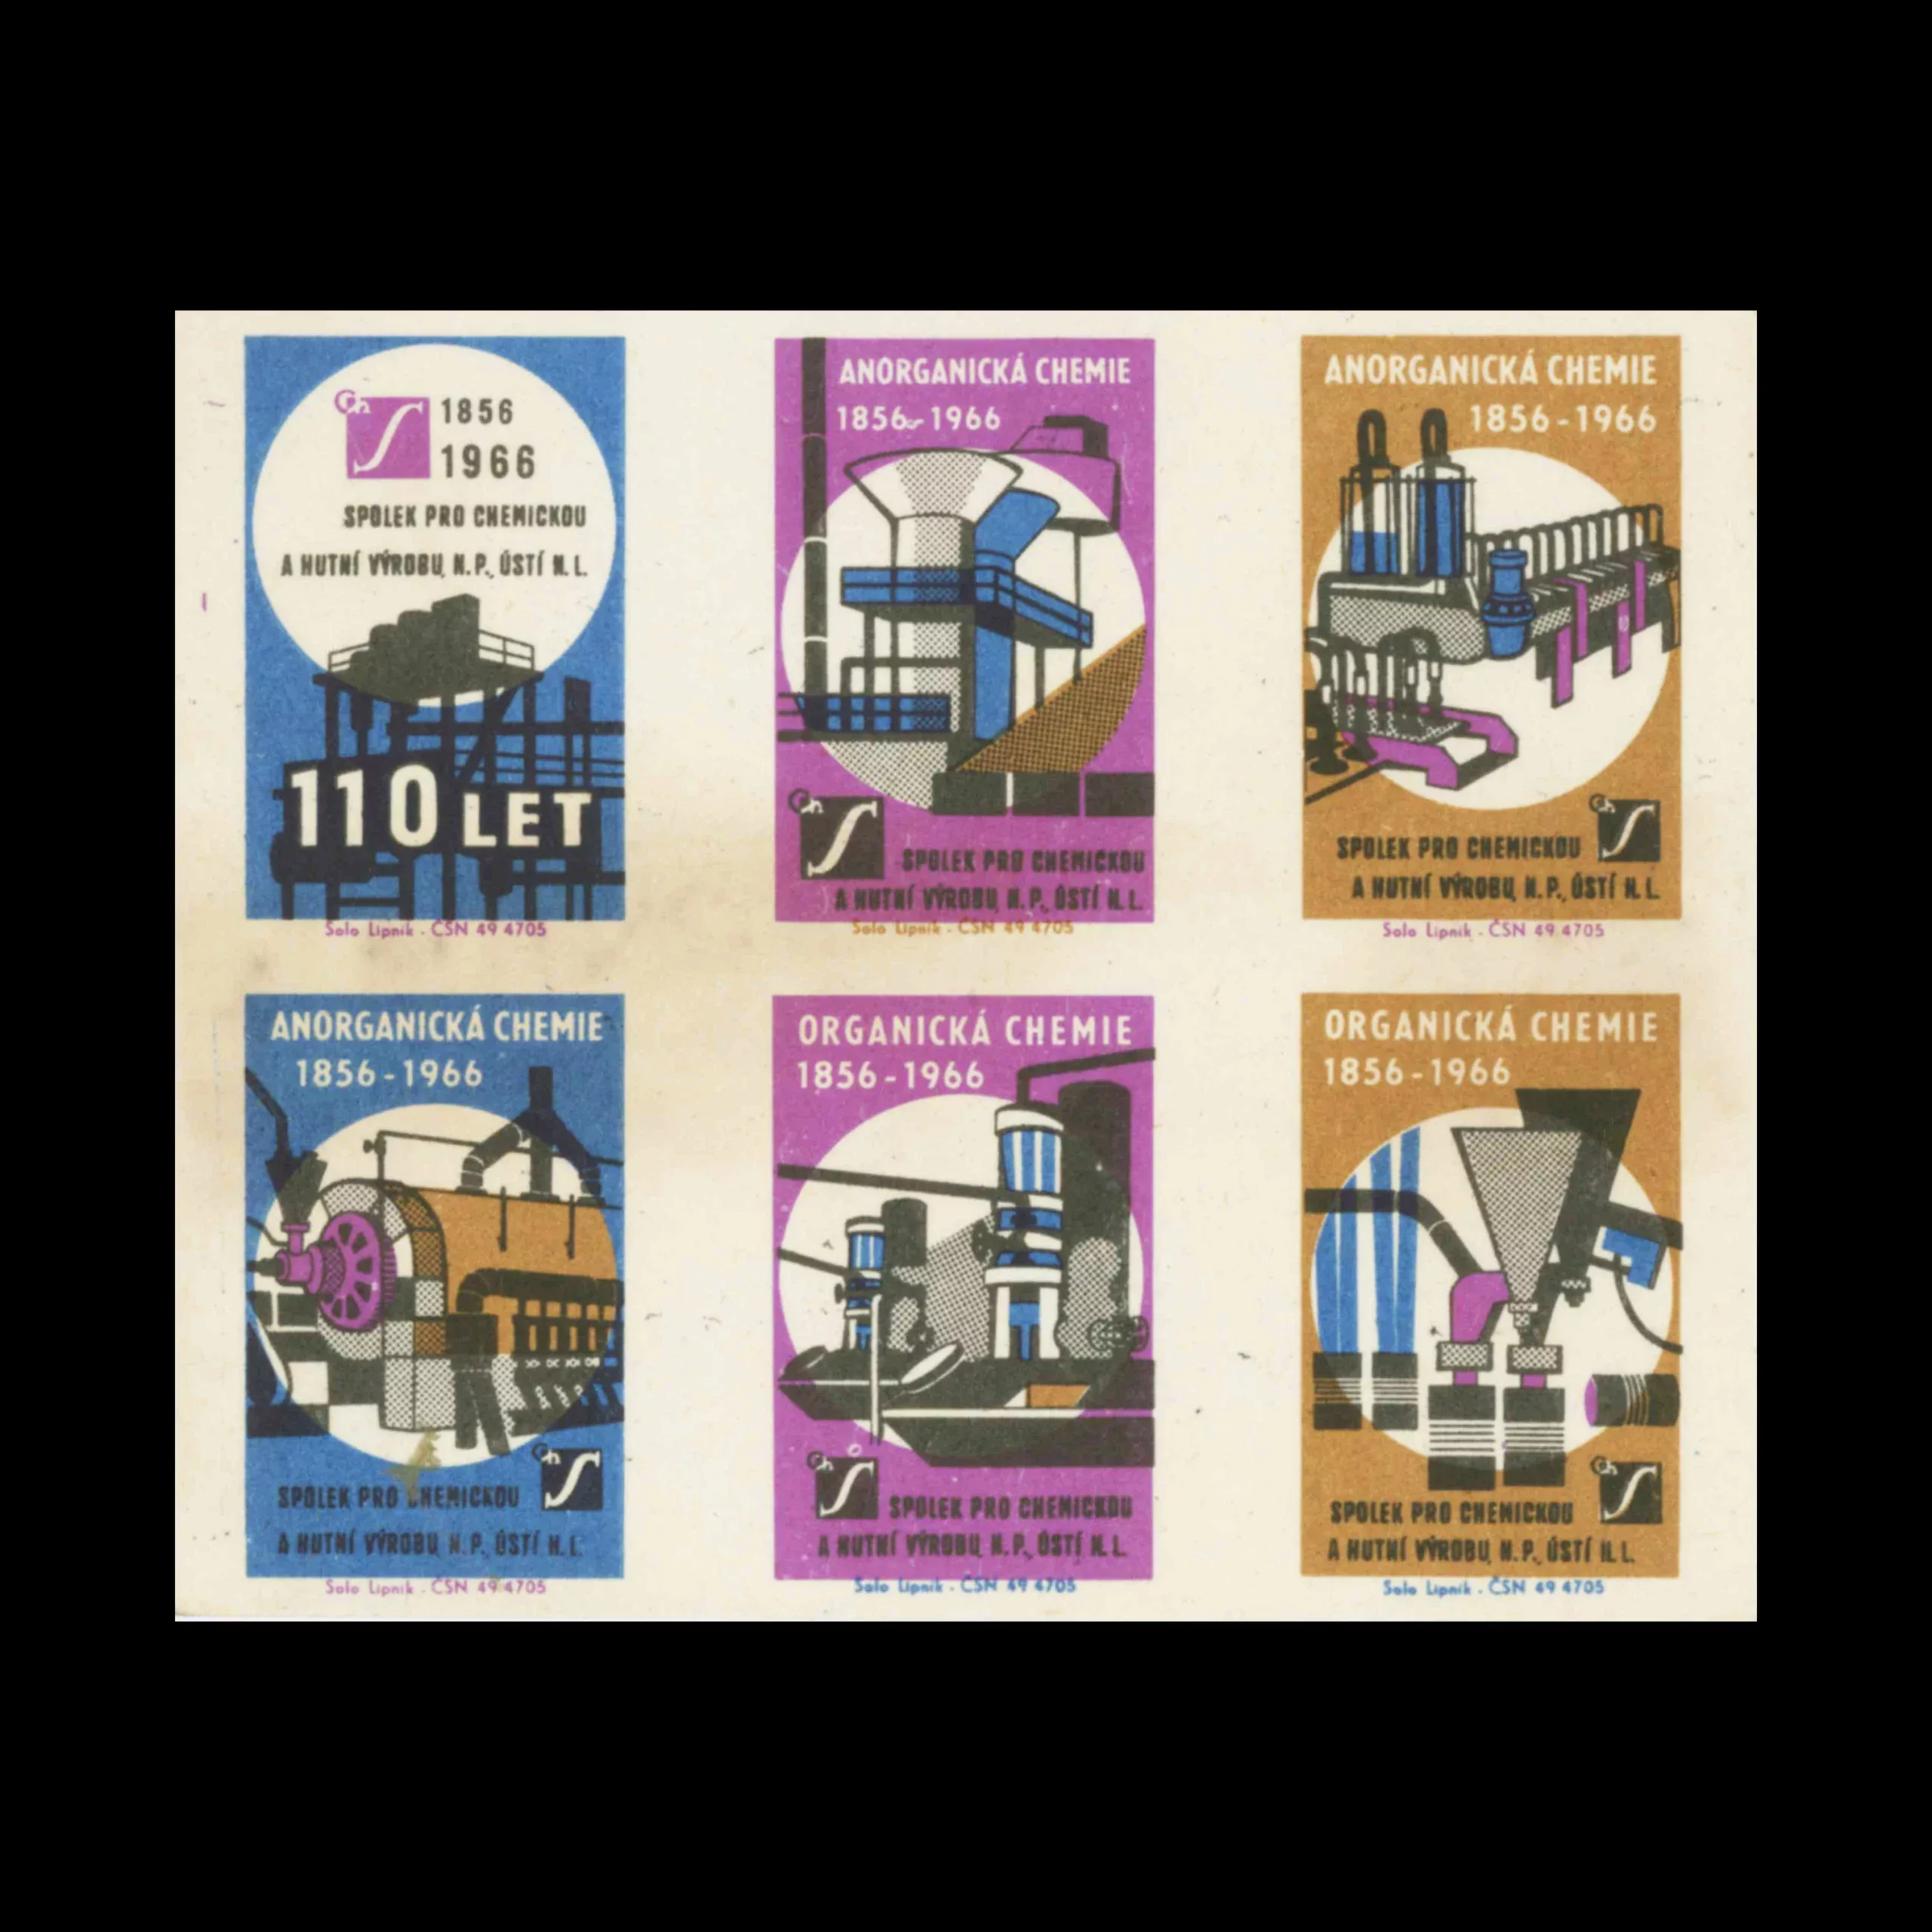 Society for Chemical and Metallurgical Production, Czechoslovakia Matchbox Label Set, 1966